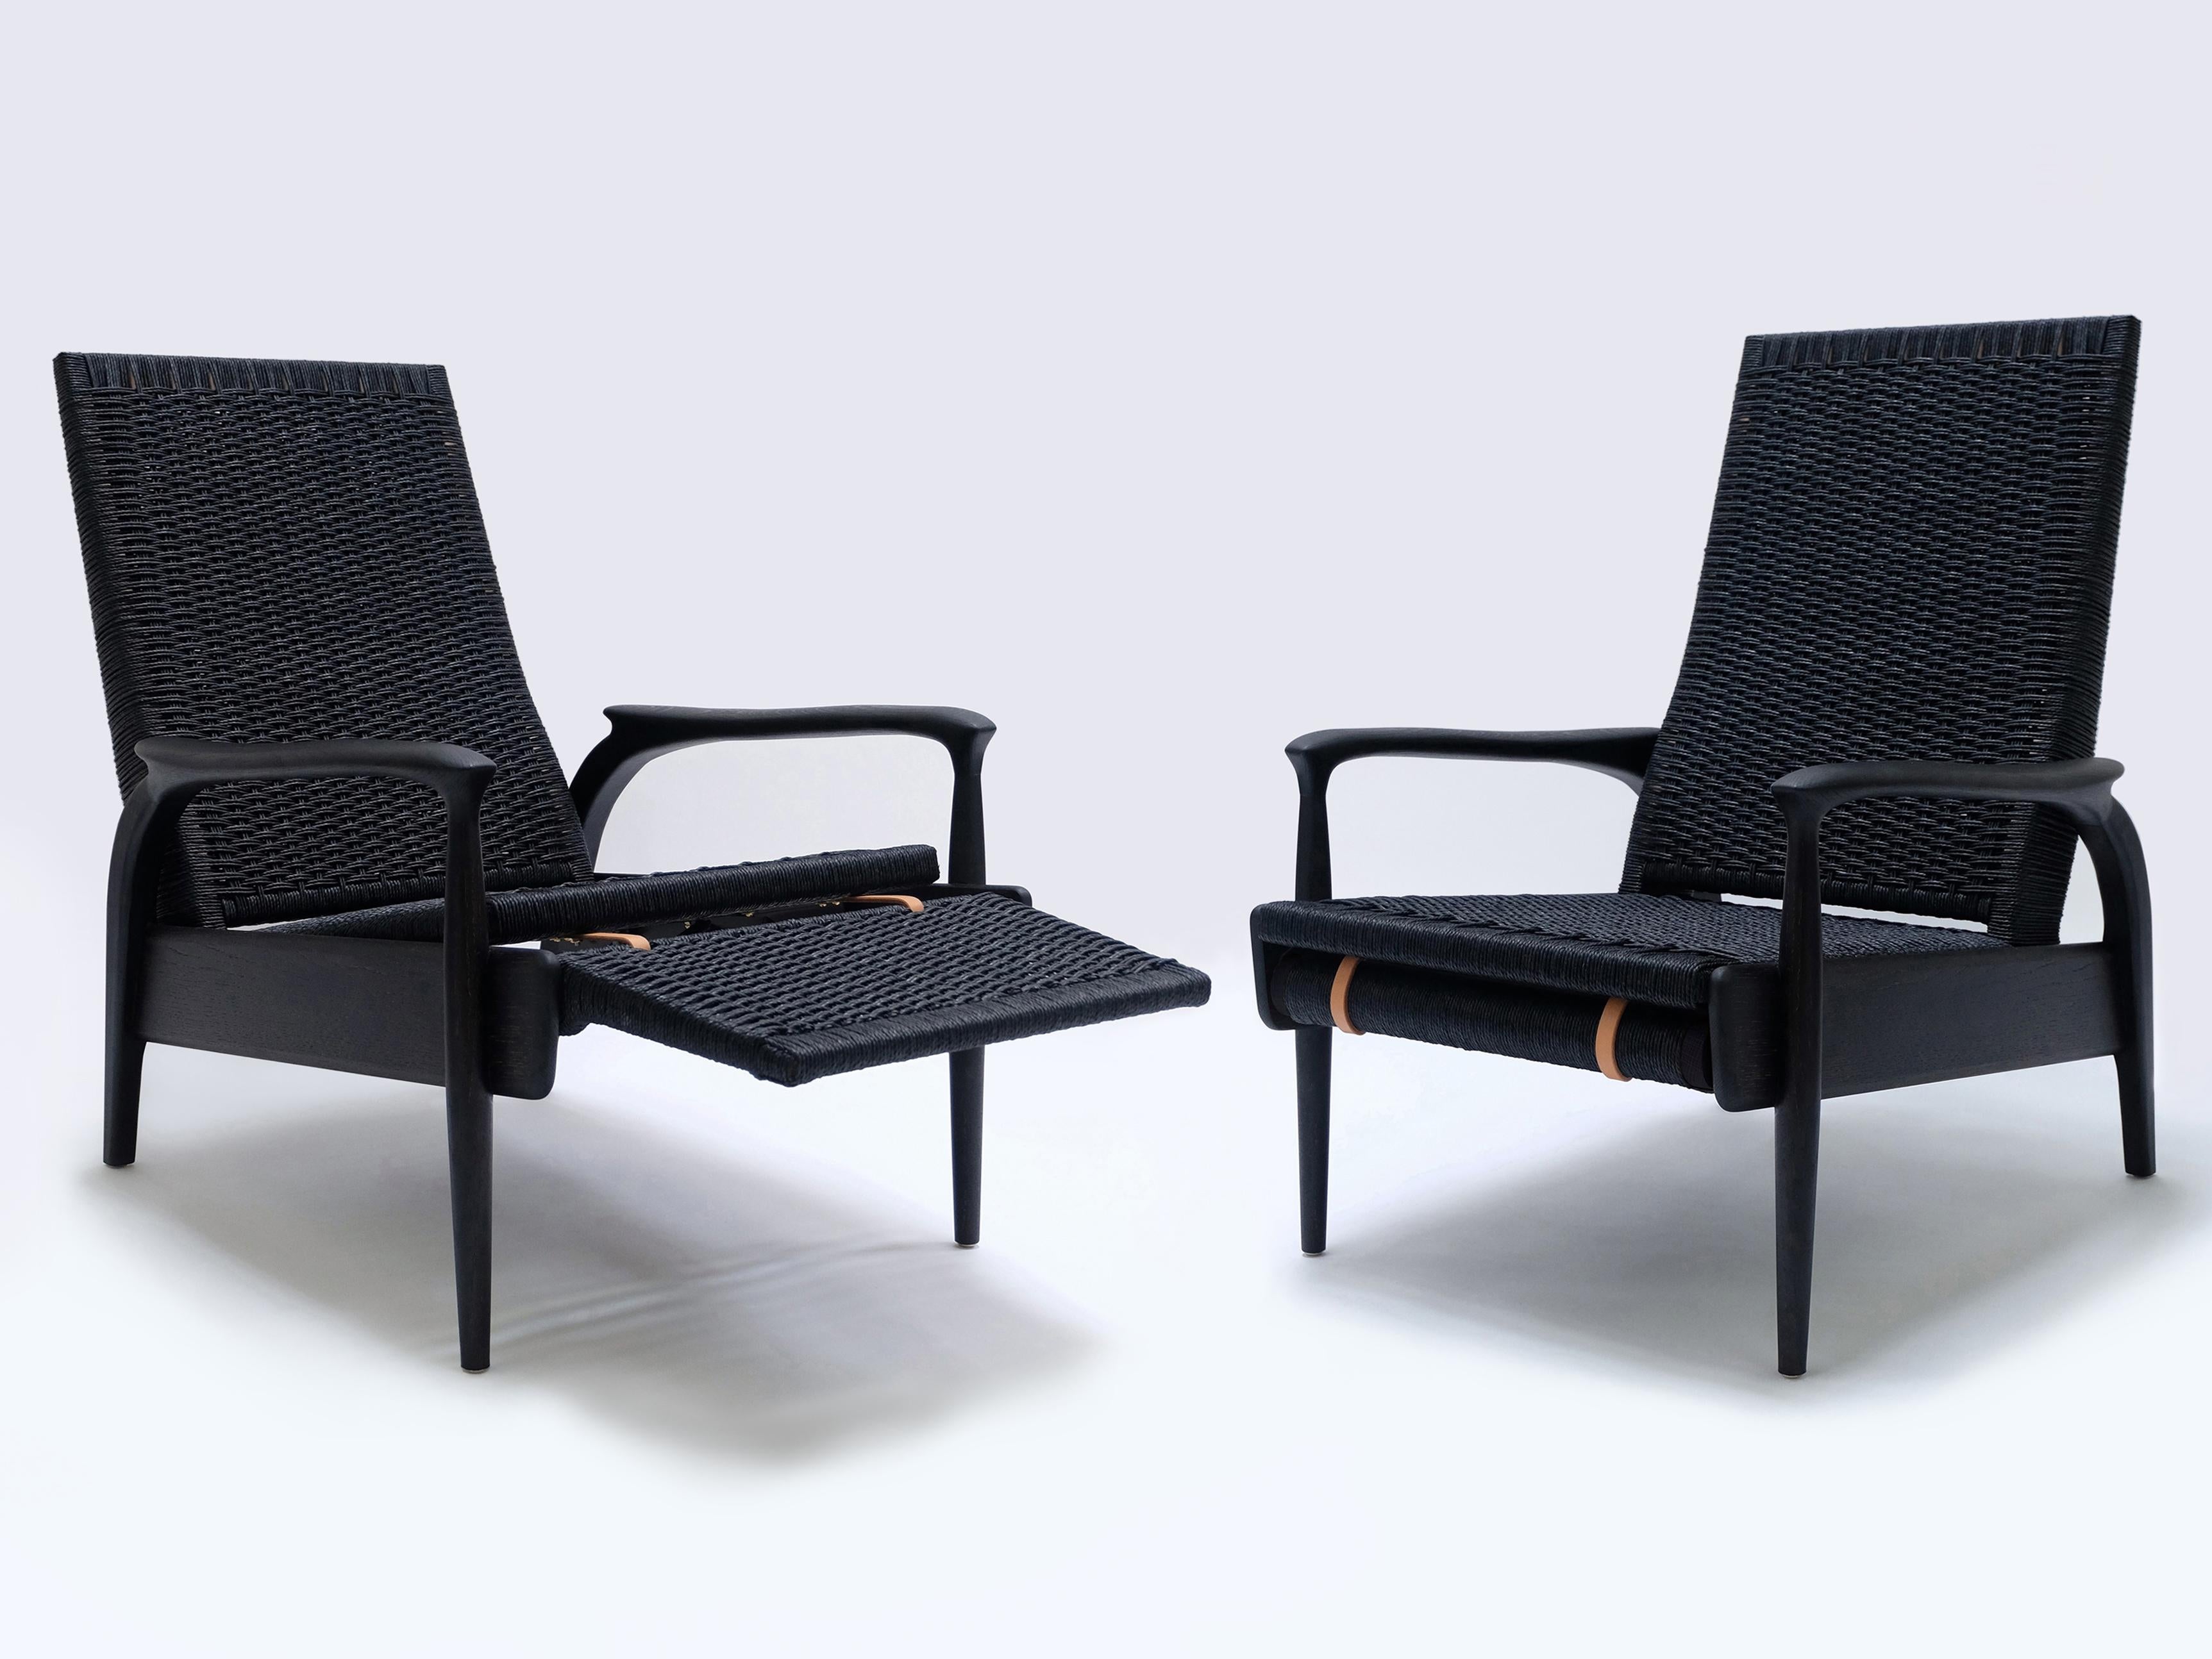 Pair of Custom-Made Handcrafted Reclining Eco Lounge Chairs FENDRIK by Studio180degree
Shown in Sustainable Solid Natural Blackened Oak and Original Black Danish Cord

Noble - Tactile – Refined - Sustainable
Reclining Eco Lounge Chair FENDRIK is a